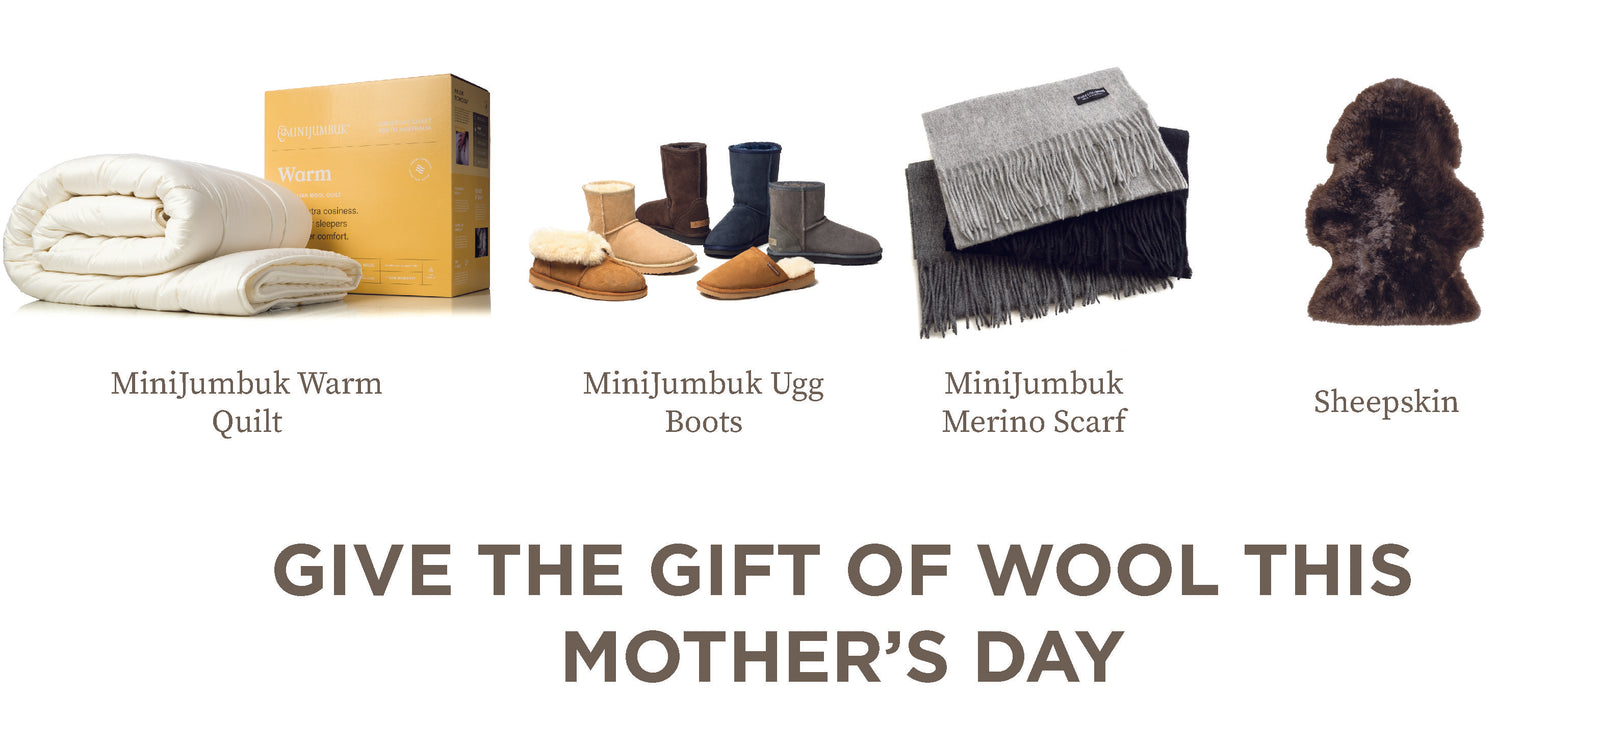 Woolly ideas for Mother's Day